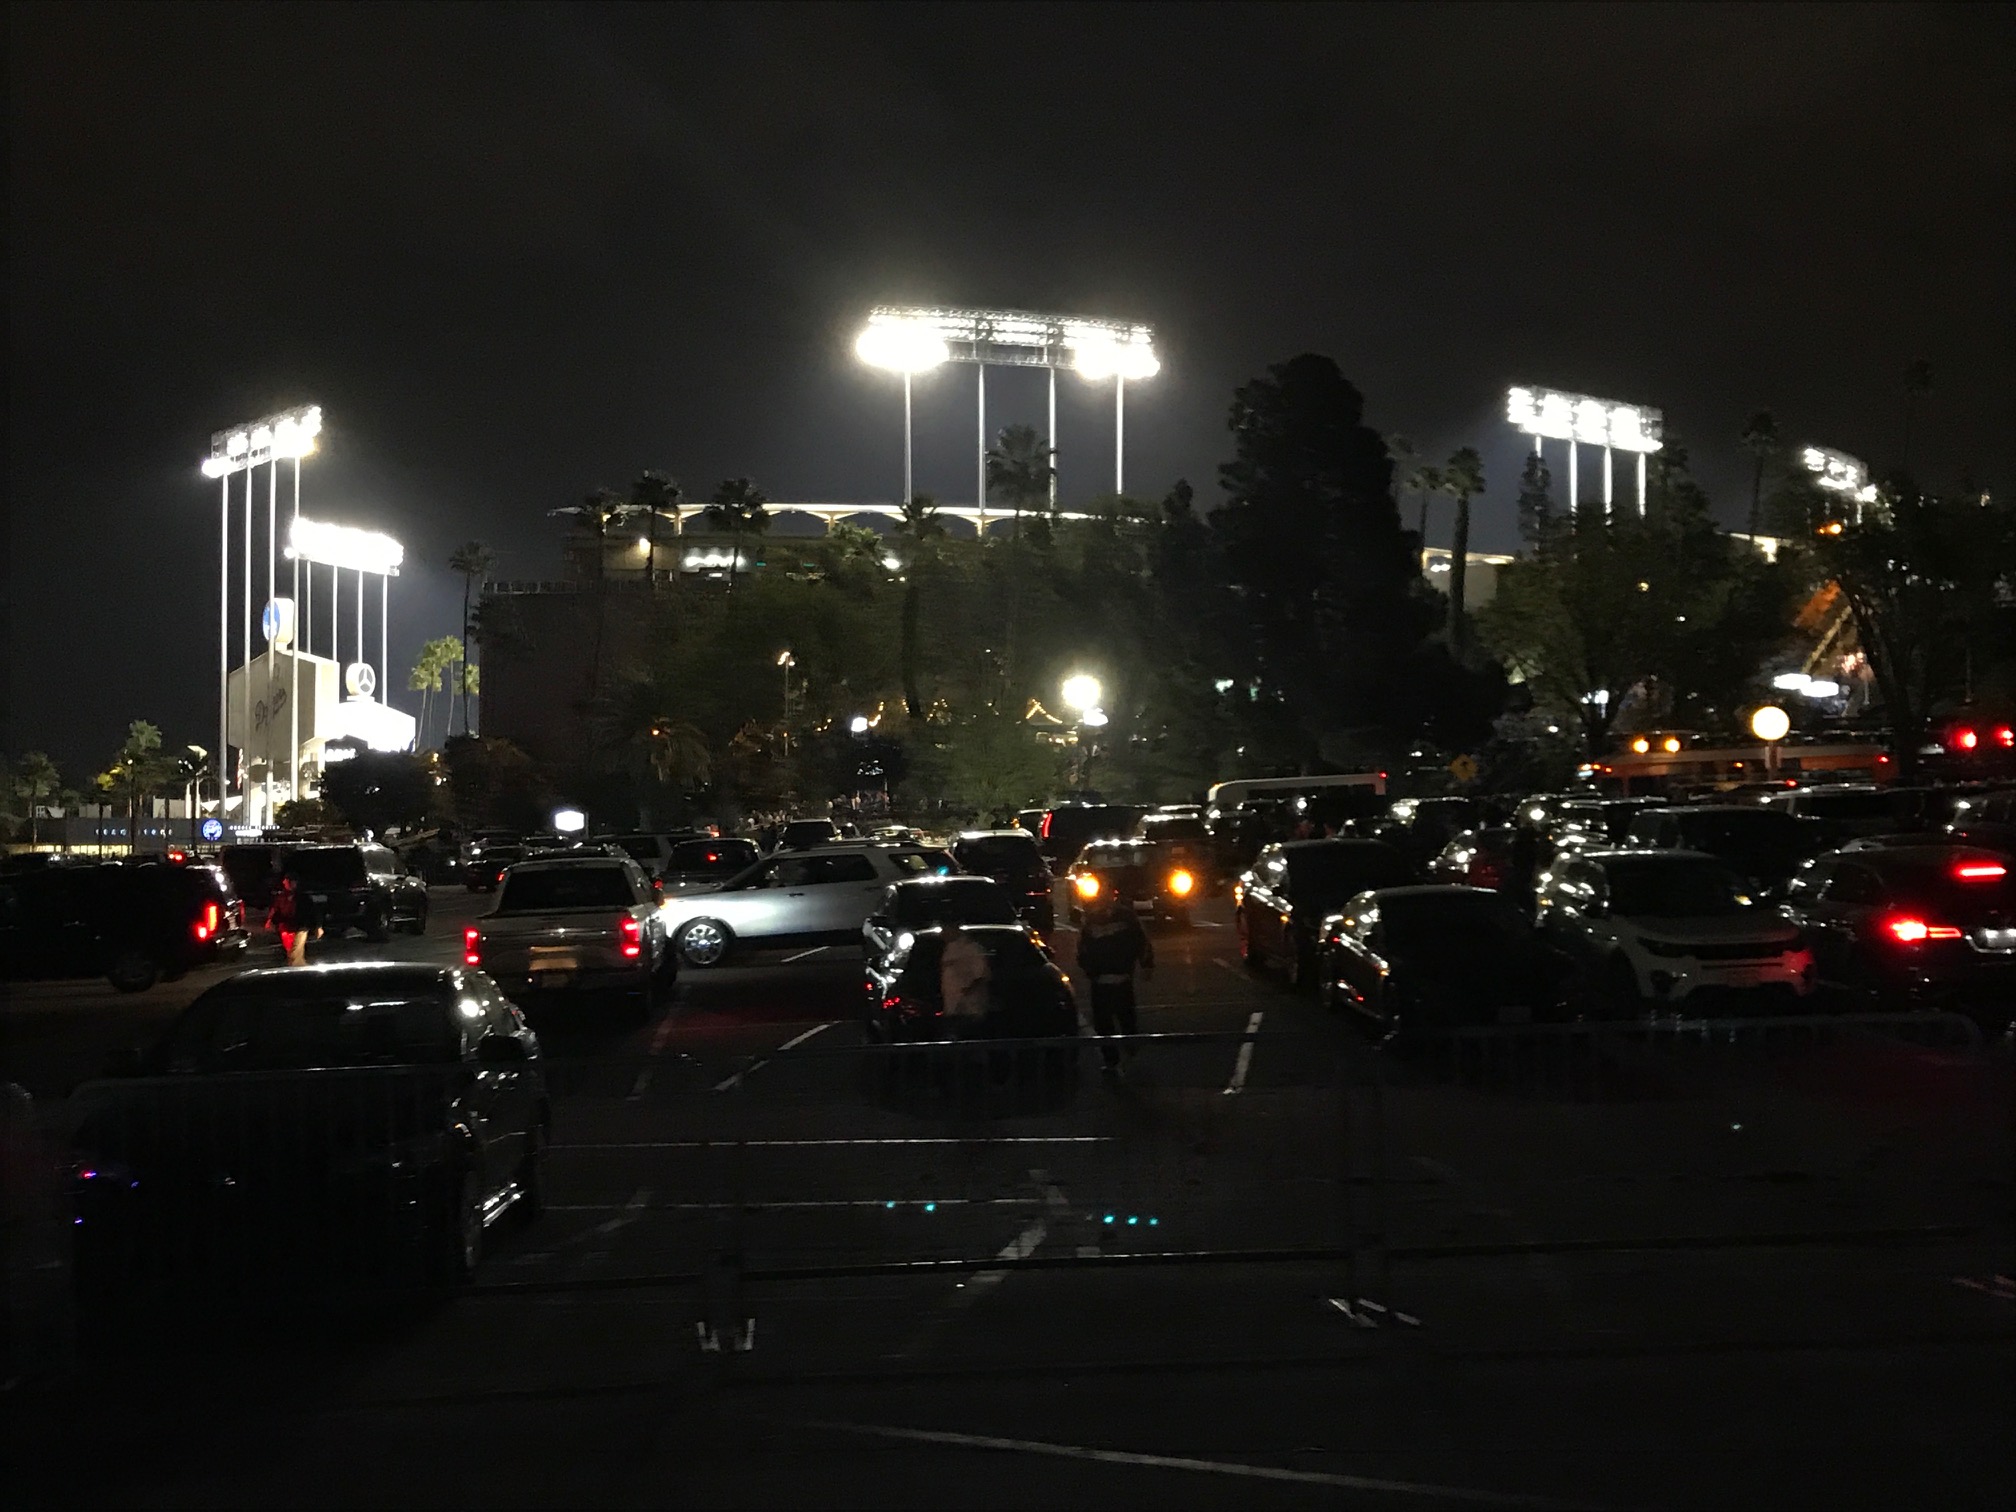 Dodger Stadium, minutes after the end of Game 7 of the 2017 World Series